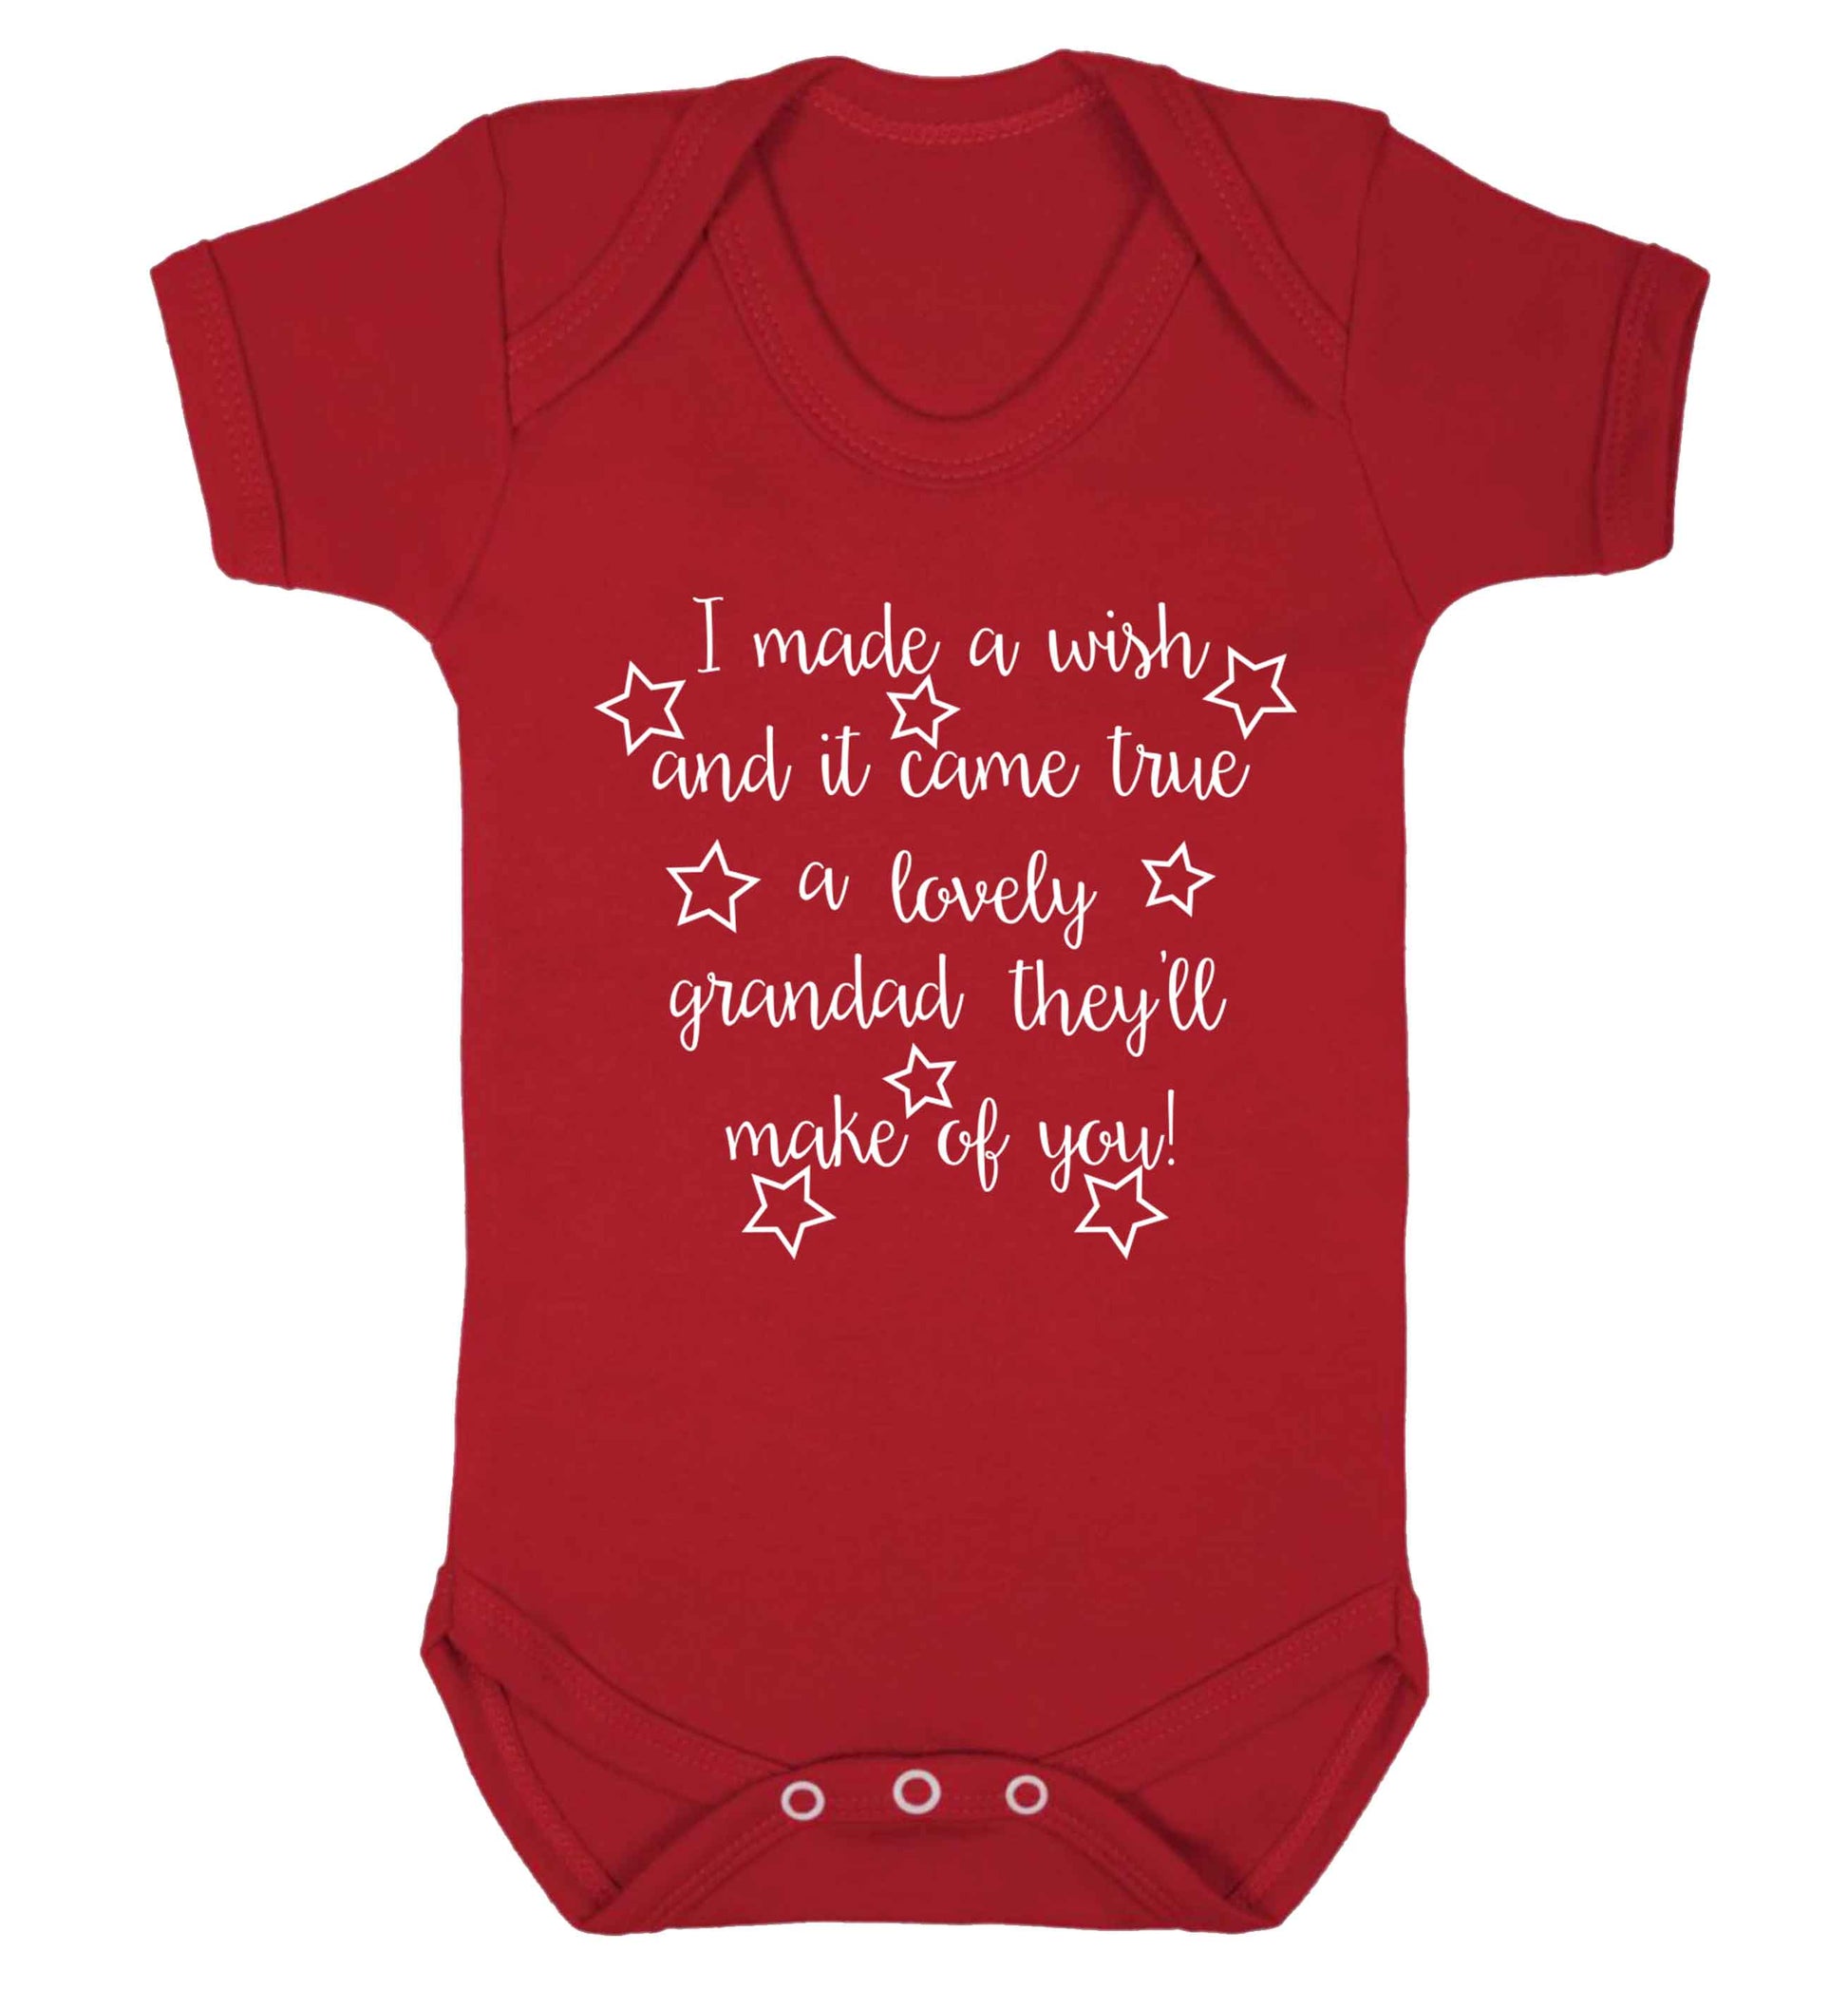 I made a wish and it came true a lovely grandad they'll make of you! Baby Vest red 18-24 months